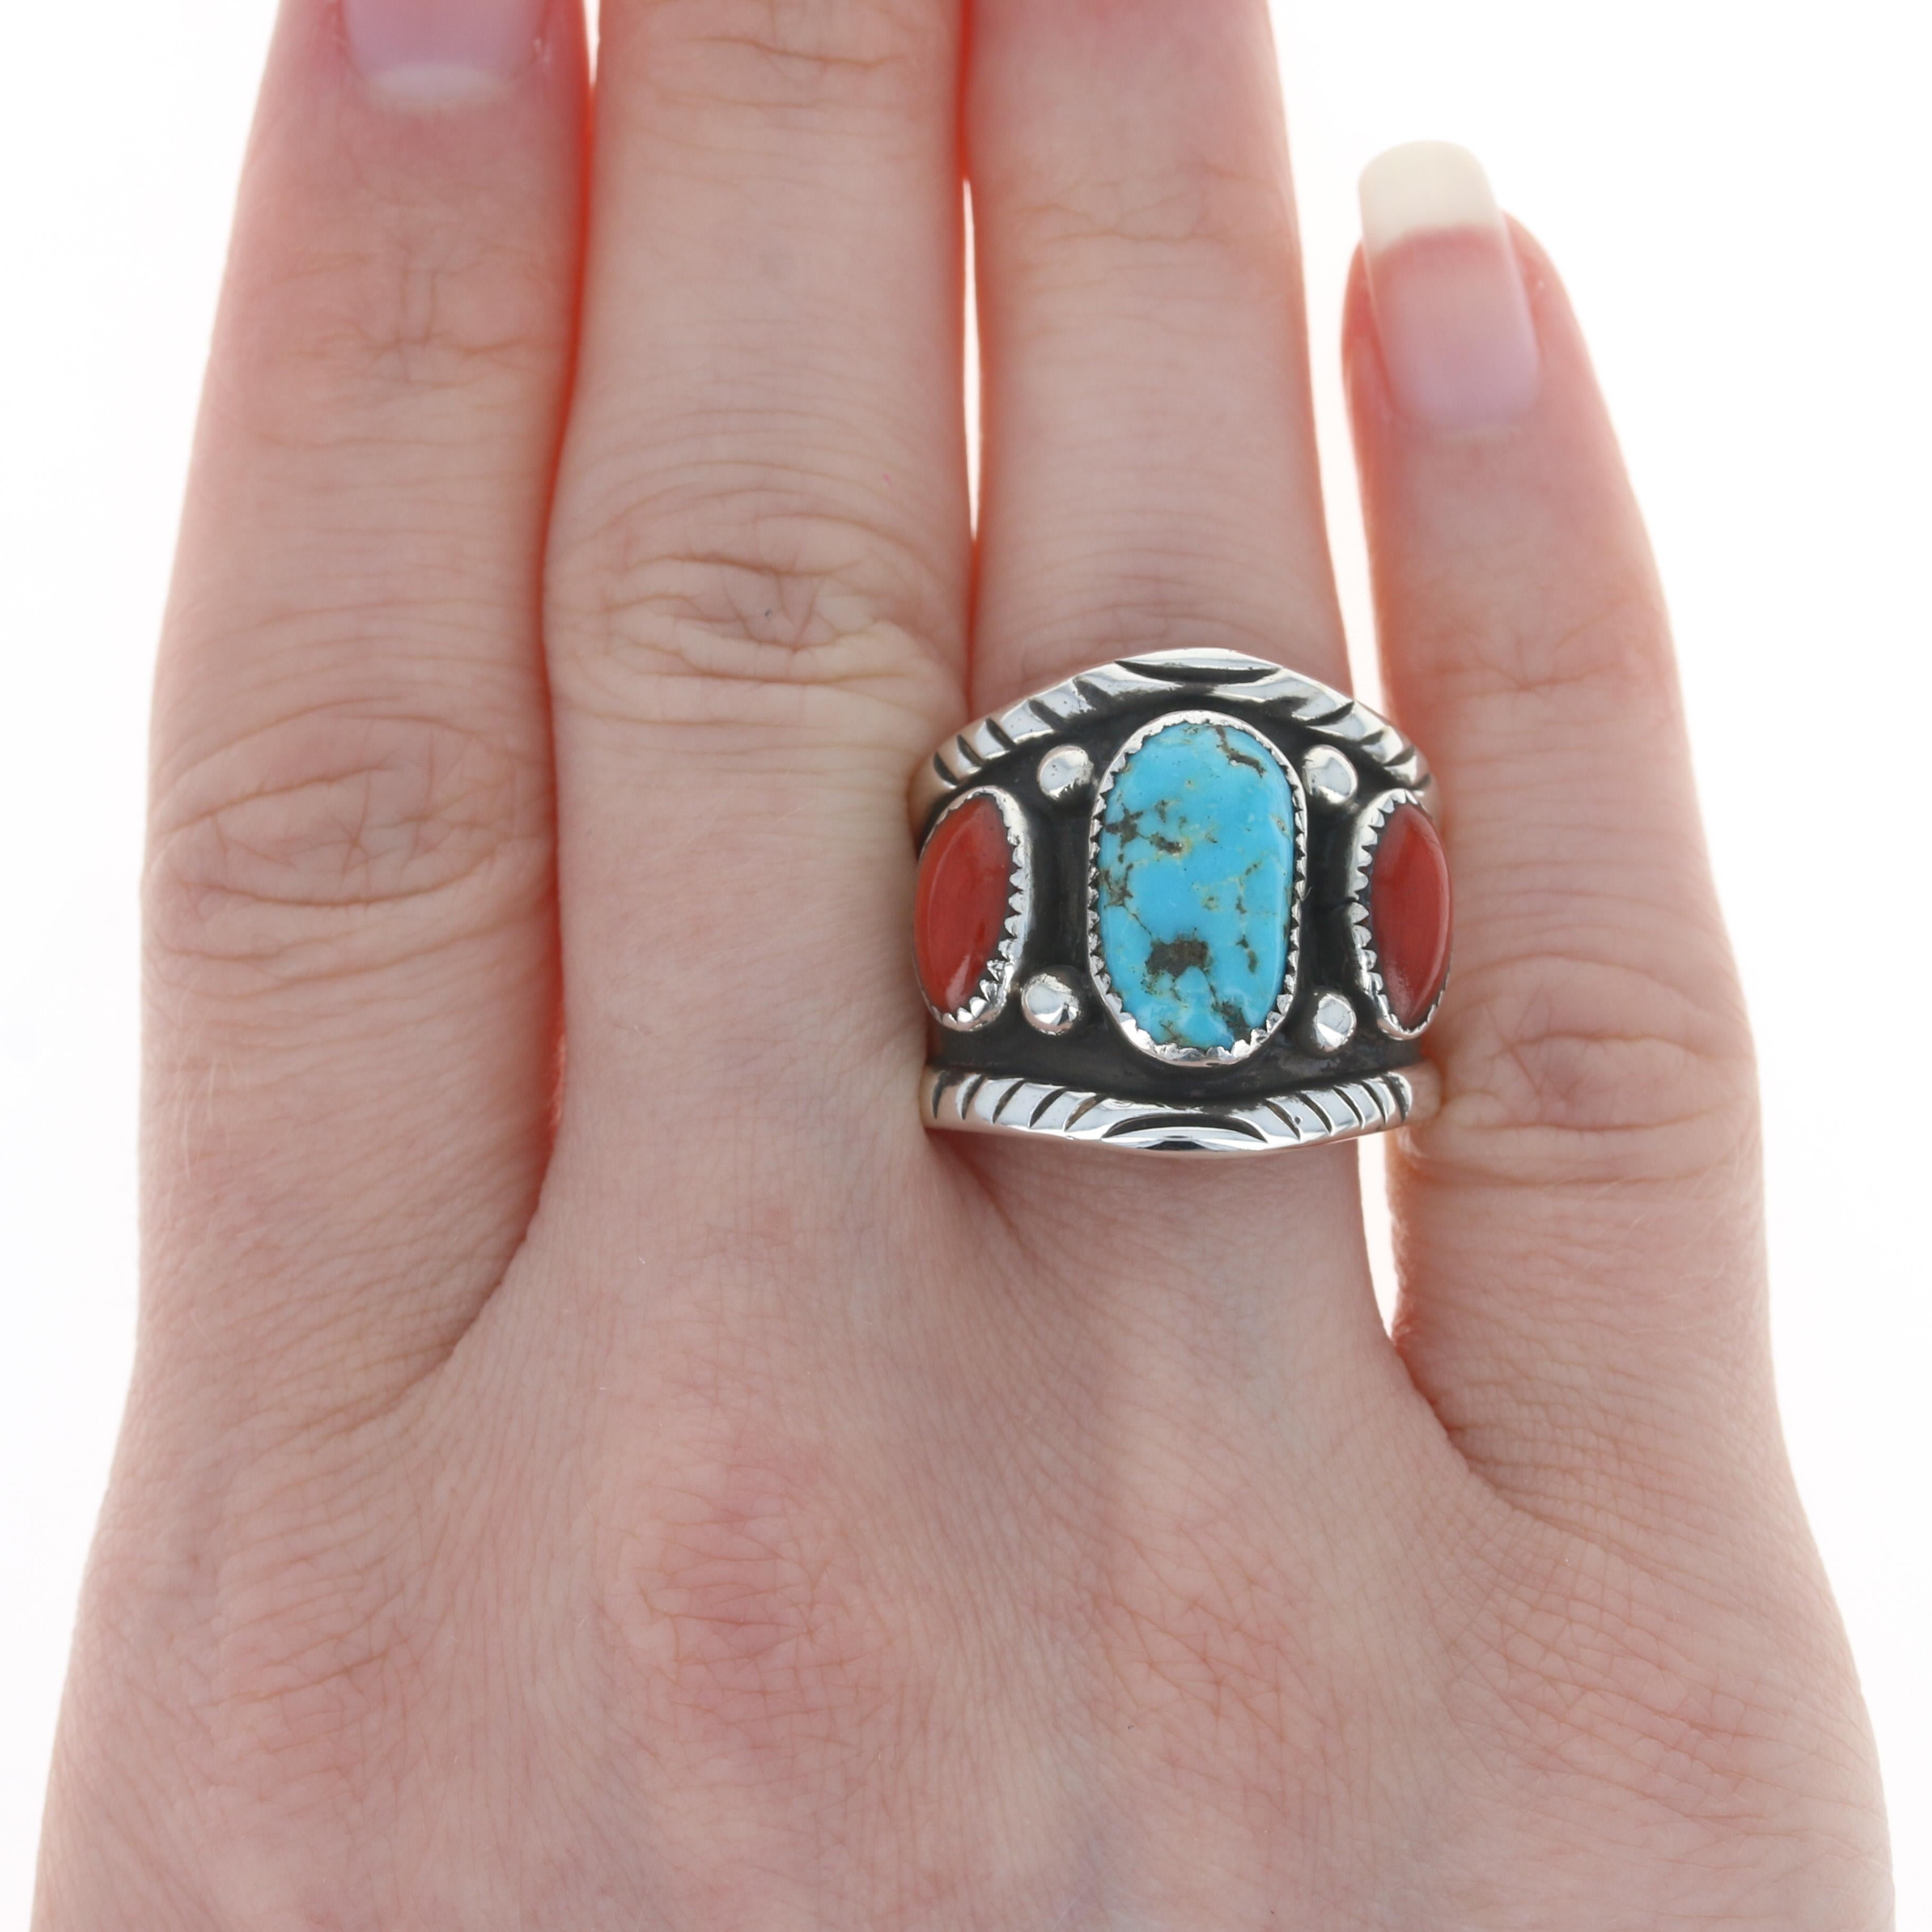 Size: 10

Native American

Metal Content: Sterling Silver

Stone Information
Genuine Turquoise
Treatment: Routinely Enhanced
Color: Blue

Genuine Coral
Color: Orangey Red

Style: Solitaire with Accents
Features: Smooth & Etched